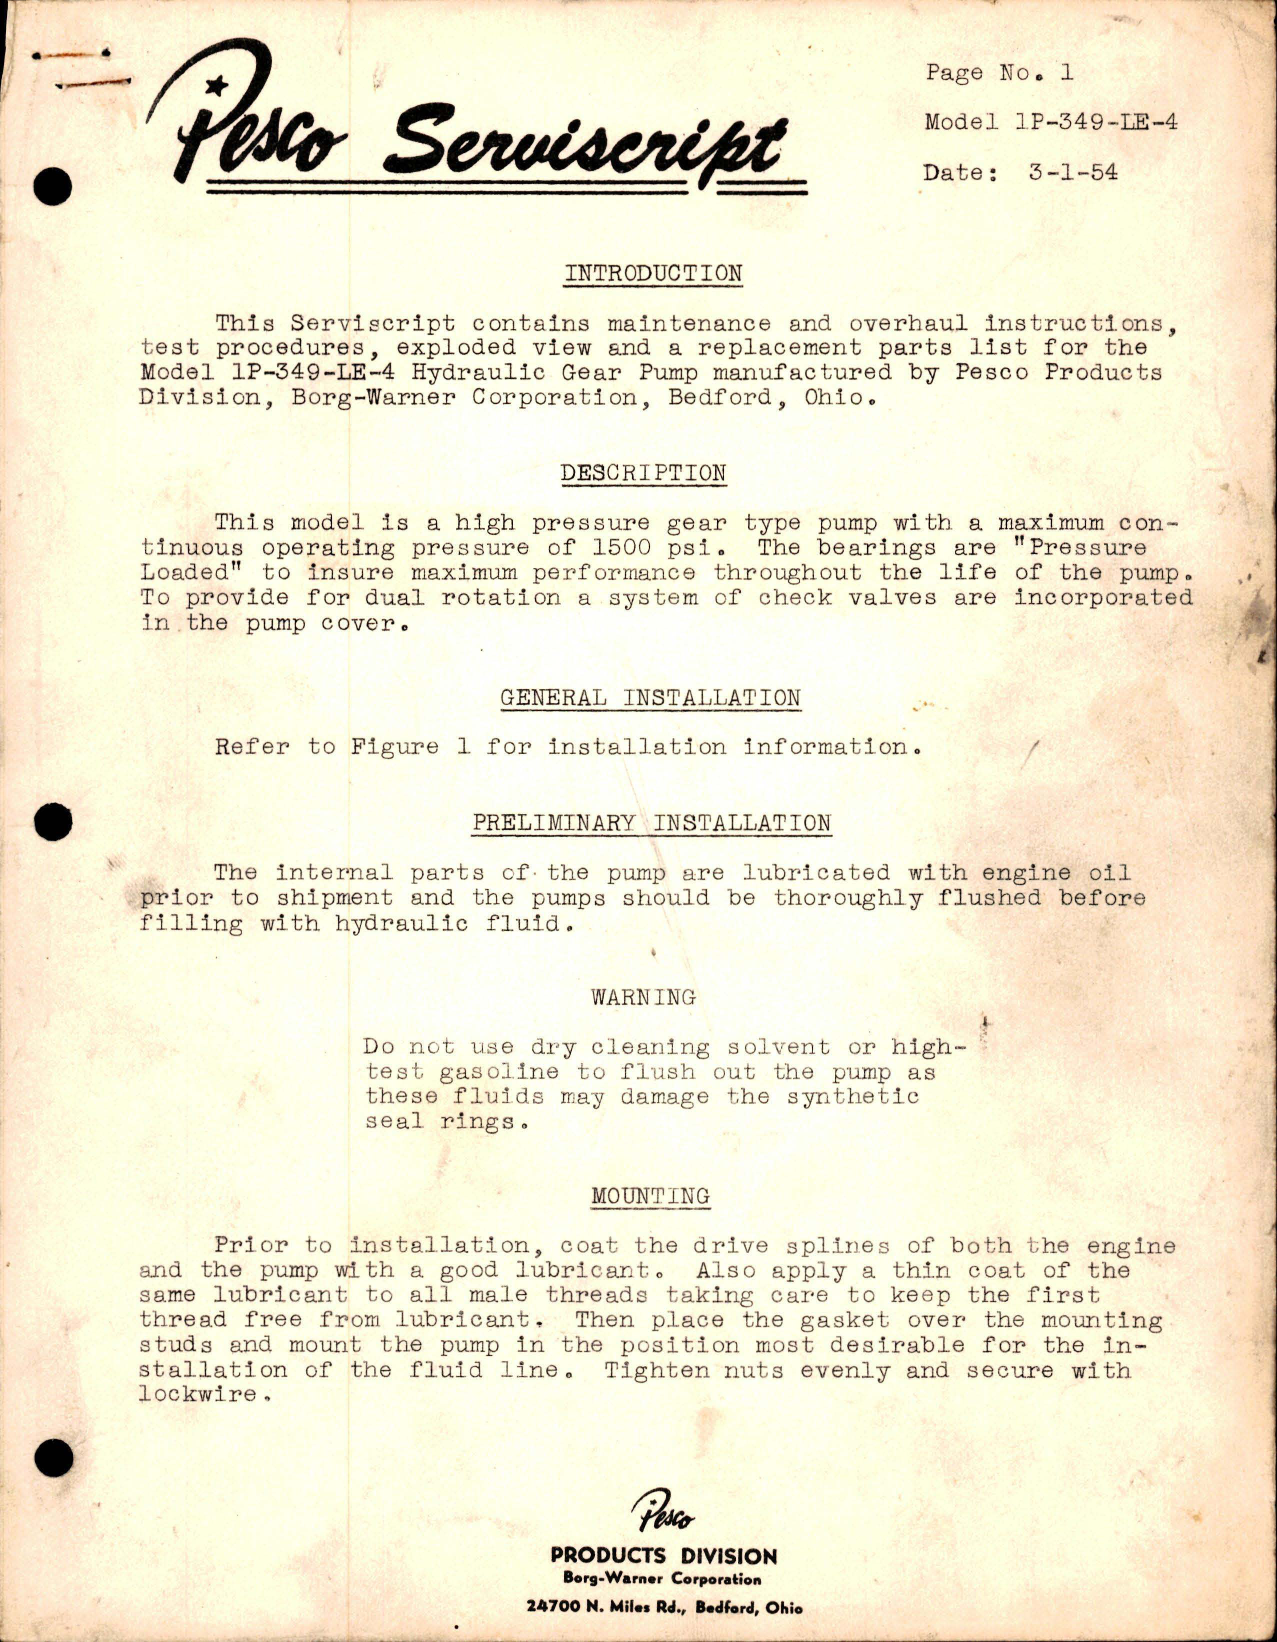 Sample page 1 from AirCorps Library document: Maintenance, Overhaul Instructions, and Test Procedures with Parts List for Hydraulic Gear Pump - Model 1P-349-LE-4 